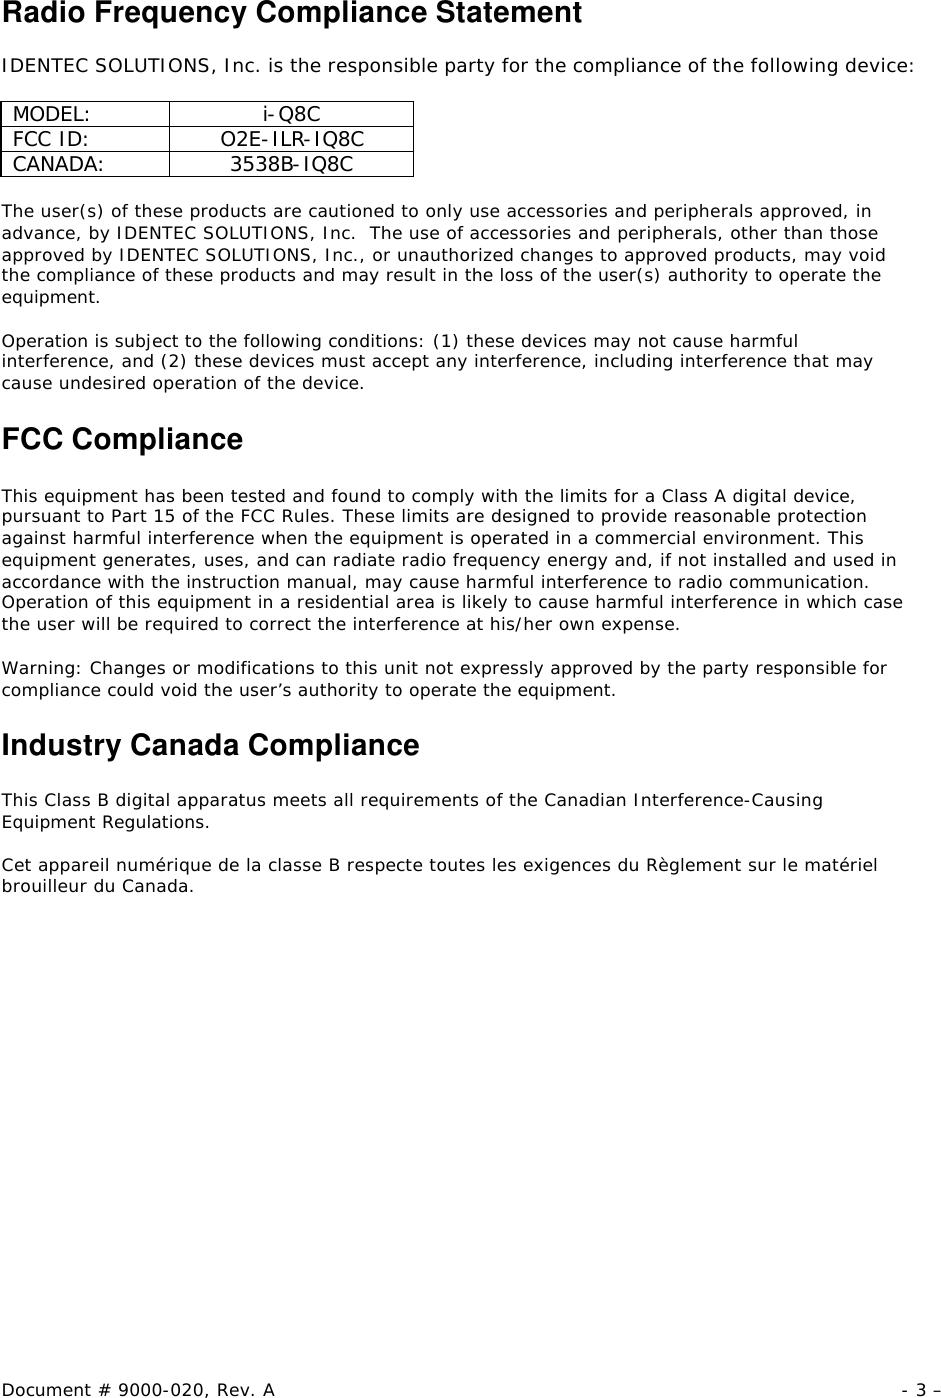 Document # 9000-020, Rev. A - 3 –  Radio Frequency Compliance Statement  IDENTEC SOLUTIONS, Inc. is the responsible party for the compliance of the following device:  MODEL: i-Q8C FCC ID: O2E-ILR-IQ8C CANADA: 3538B-IQ8C  The user(s) of these products are cautioned to only use accessories and peripherals approved, in advance, by IDENTEC SOLUTIONS, Inc.  The use of accessories and peripherals, other than those approved by IDENTEC SOLUTIONS, Inc., or unauthorized changes to approved products, may void the compliance of these products and may result in the loss of the user(s) authority to operate the equipment.  Operation is subject to the following conditions: (1) these devices may not cause harmful interference, and (2) these devices must accept any interference, including interference that may cause undesired operation of the device.  FCC Compliance  This equipment has been tested and found to comply with the limits for a Class A digital device, pursuant to Part 15 of the FCC Rules. These limits are designed to provide reasonable protection against harmful interference when the equipment is operated in a commercial environment. This equipment generates, uses, and can radiate radio frequency energy and, if not installed and used in accordance with the instruction manual, may cause harmful interference to radio communication. Operation of this equipment in a residential area is likely to cause harmful interference in which case the user will be required to correct the interference at his/her own expense.  Warning: Changes or modifications to this unit not expressly approved by the party responsible for compliance could void the user’s authority to operate the equipment.  Industry Canada Compliance  This Class B digital apparatus meets all requirements of the Canadian Interference-Causing Equipment Regulations.  Cet appareil numérique de la classe B respecte toutes les exigences du Règlement sur le matériel brouilleur du Canada. 